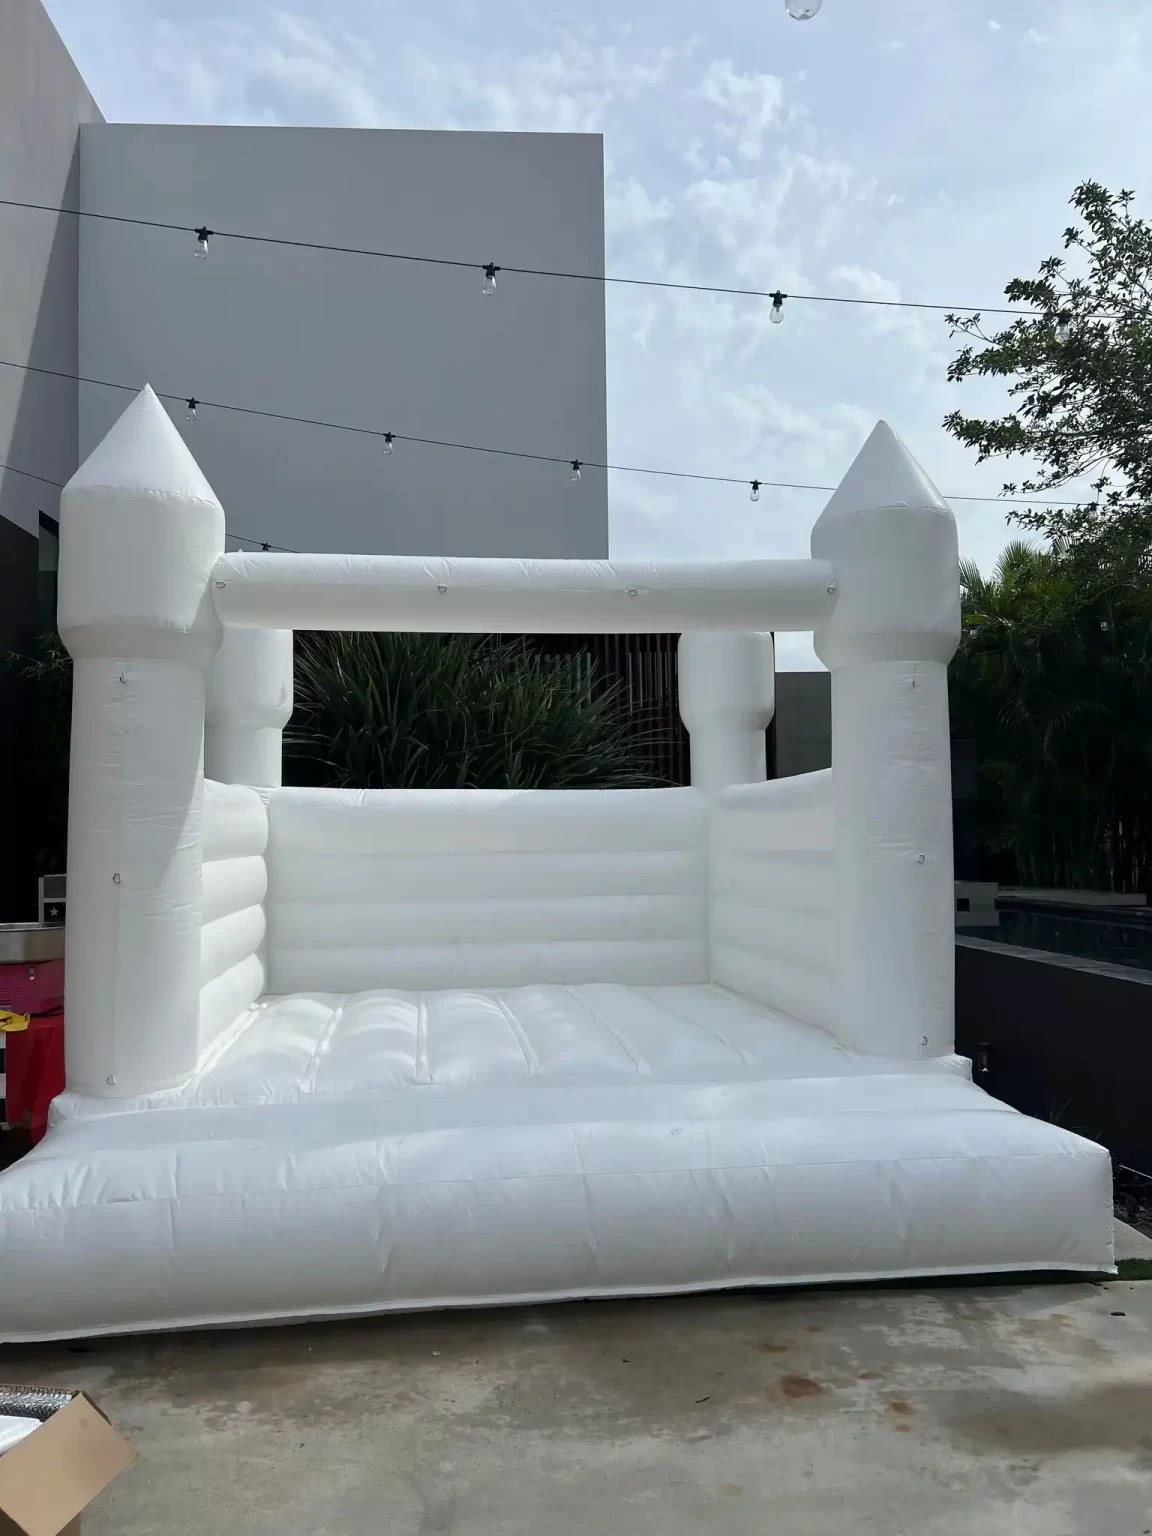 Inflatable white castle-shaped bouncy house with no roof, set up on a concrete surface near a building with string lights above.